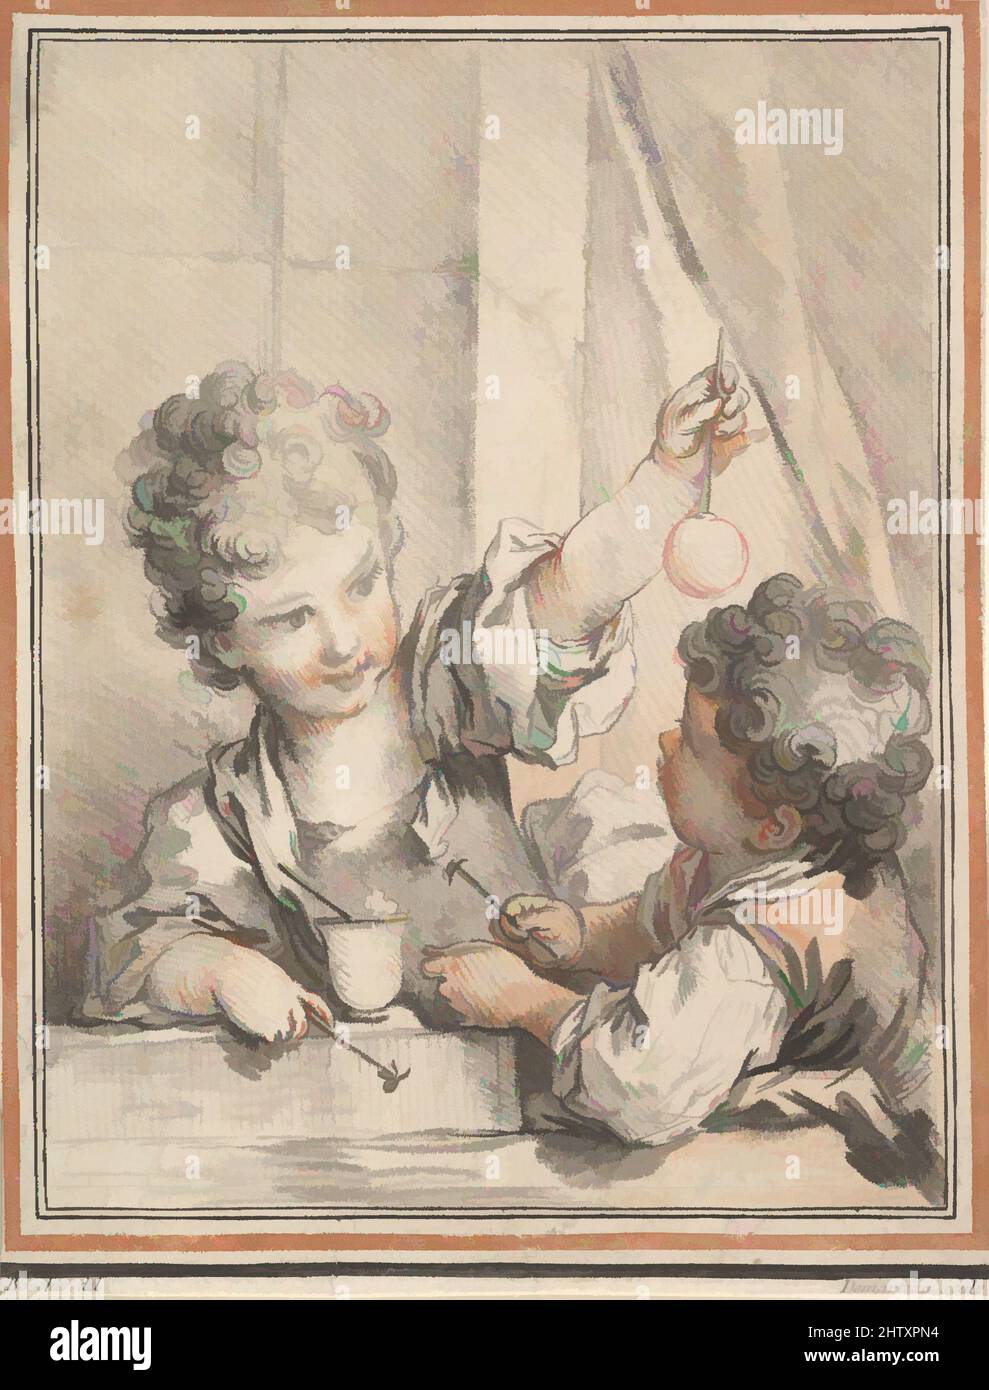 Art inspired by Les Enfants physiciens, chalk manner, sheet: 7 1/8 x 5 7/16 in. (18.1 x 13.8 cm), Prints, Gilles Demarteau (French, Liège 1722–1776 Paris), After François Boucher (French, Paris 1703–1770 Paris, Classic works modernized by Artotop with a splash of modernity. Shapes, color and value, eye-catching visual impact on art. Emotions through freedom of artworks in a contemporary way. A timeless message pursuing a wildly creative new direction. Artists turning to the digital medium and creating the Artotop NFT Stock Photo